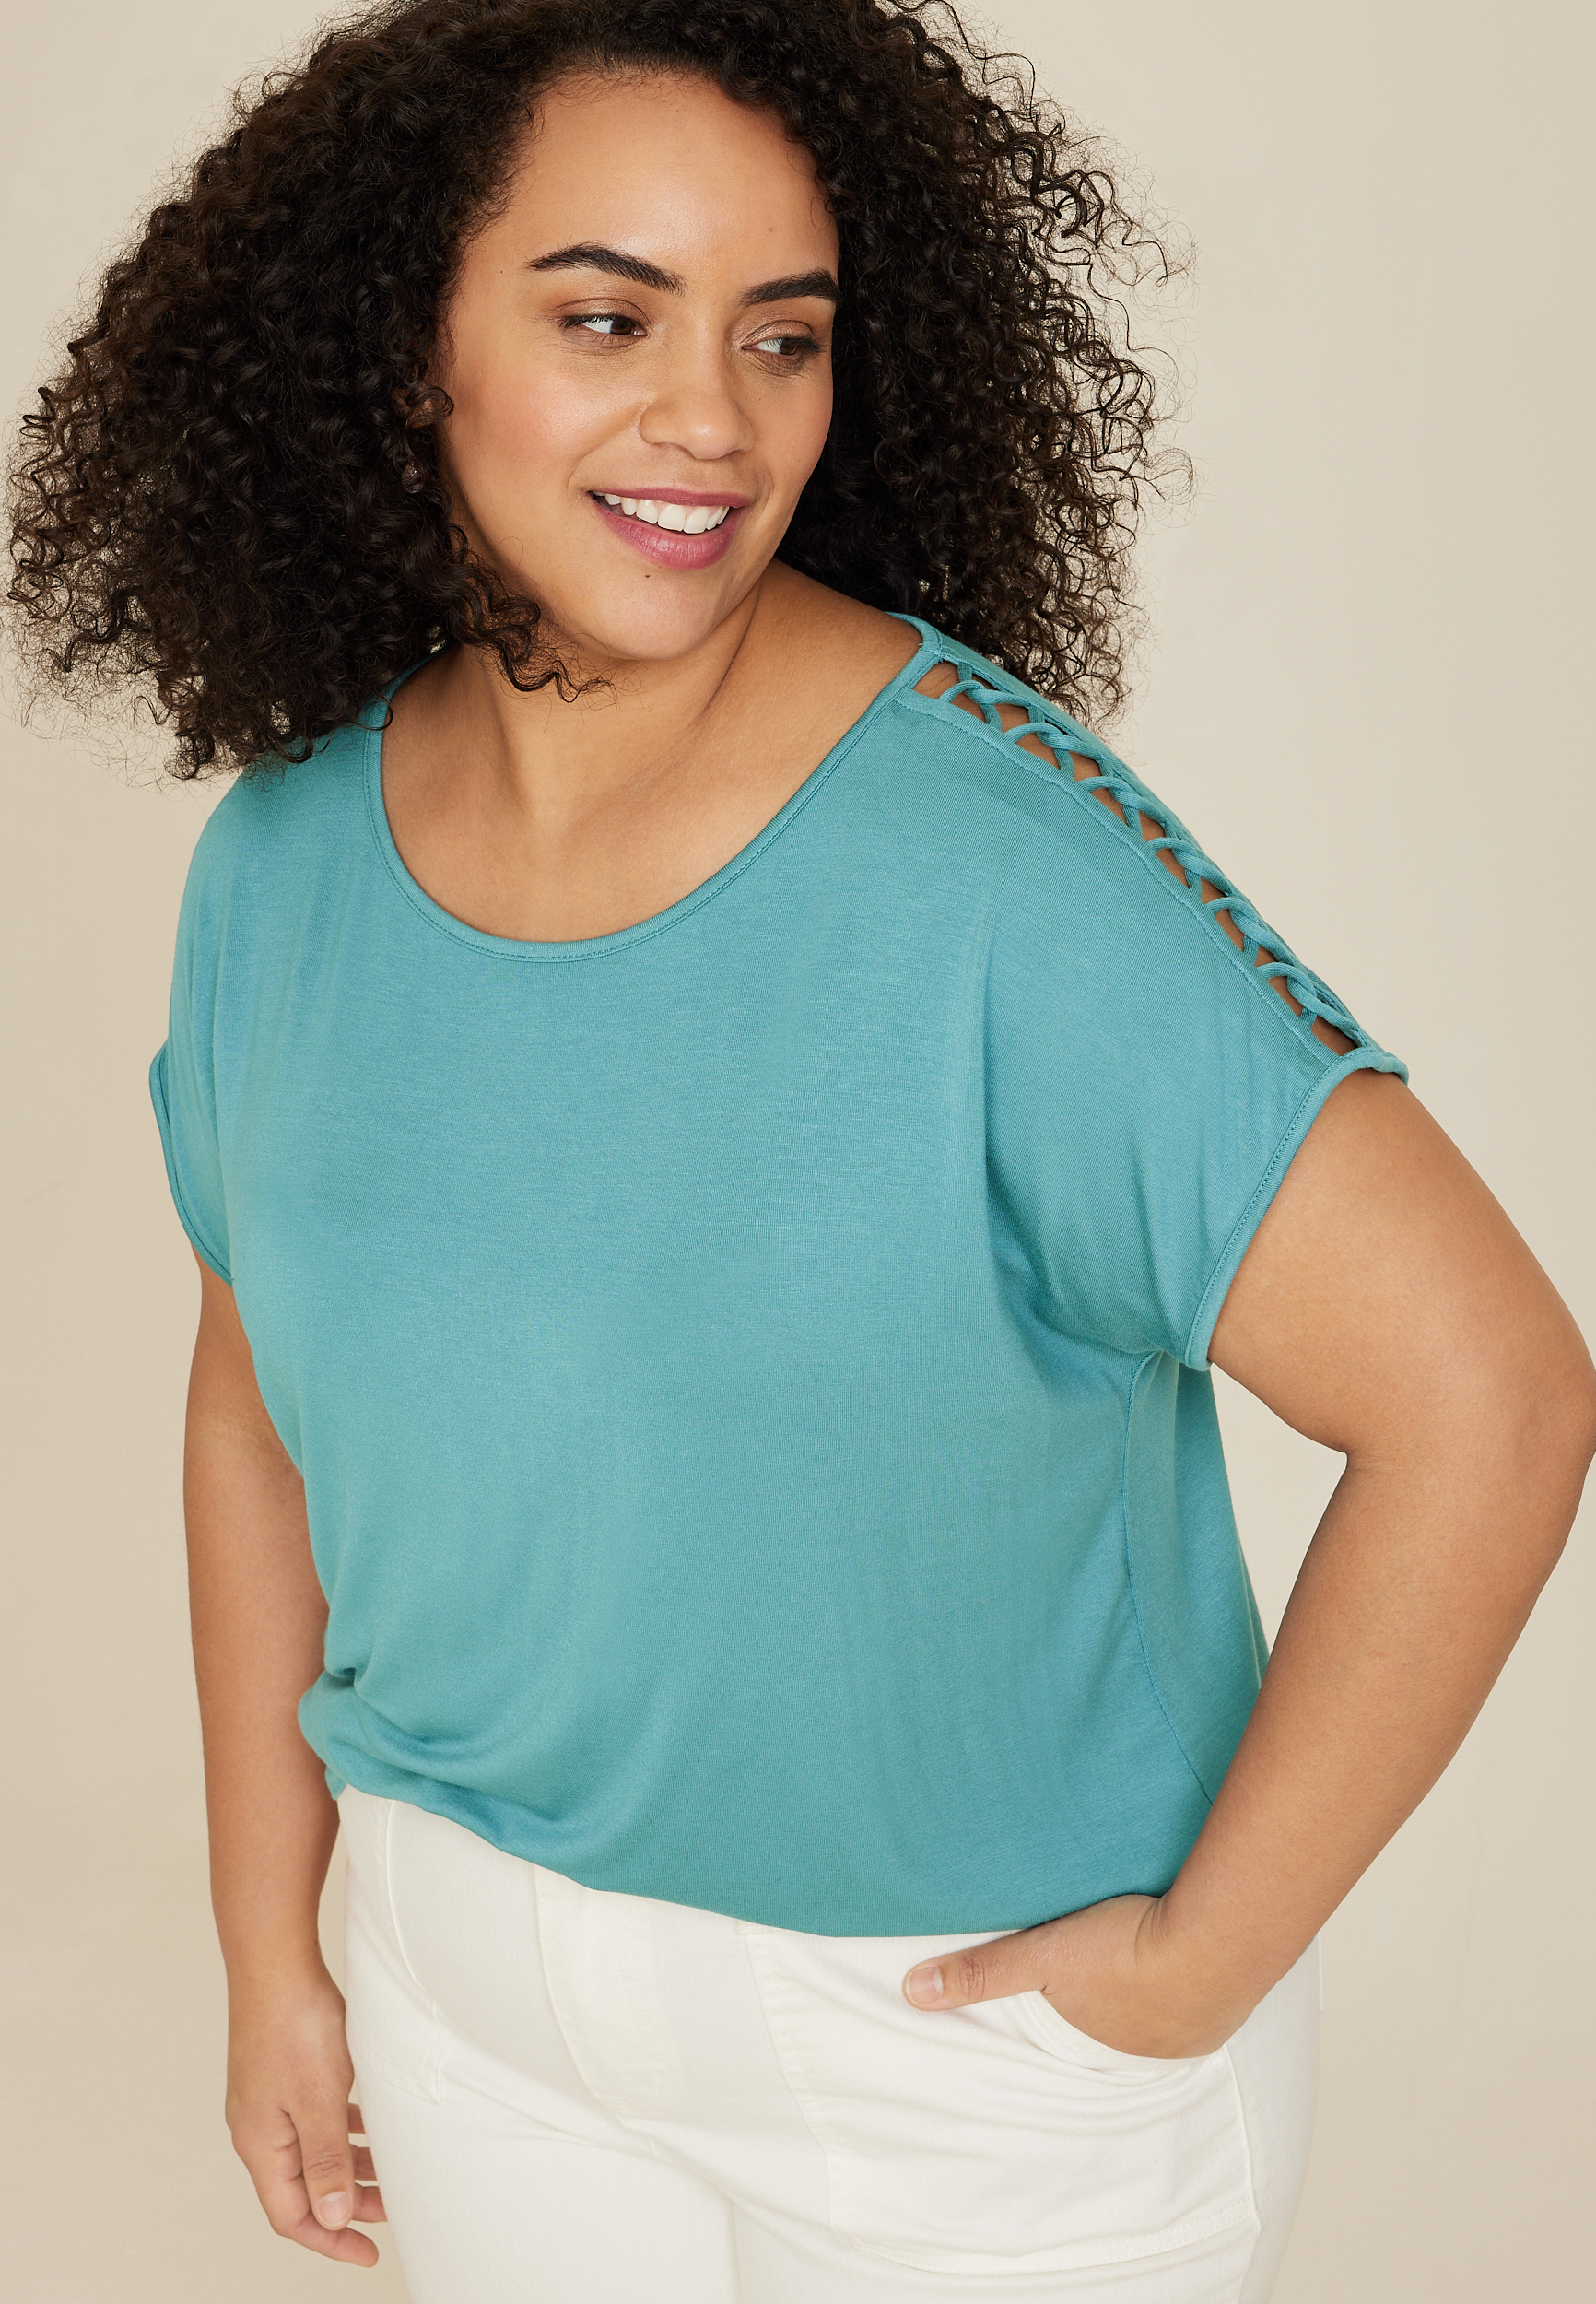 Plump woman. Plus size young people, fashion clothes for